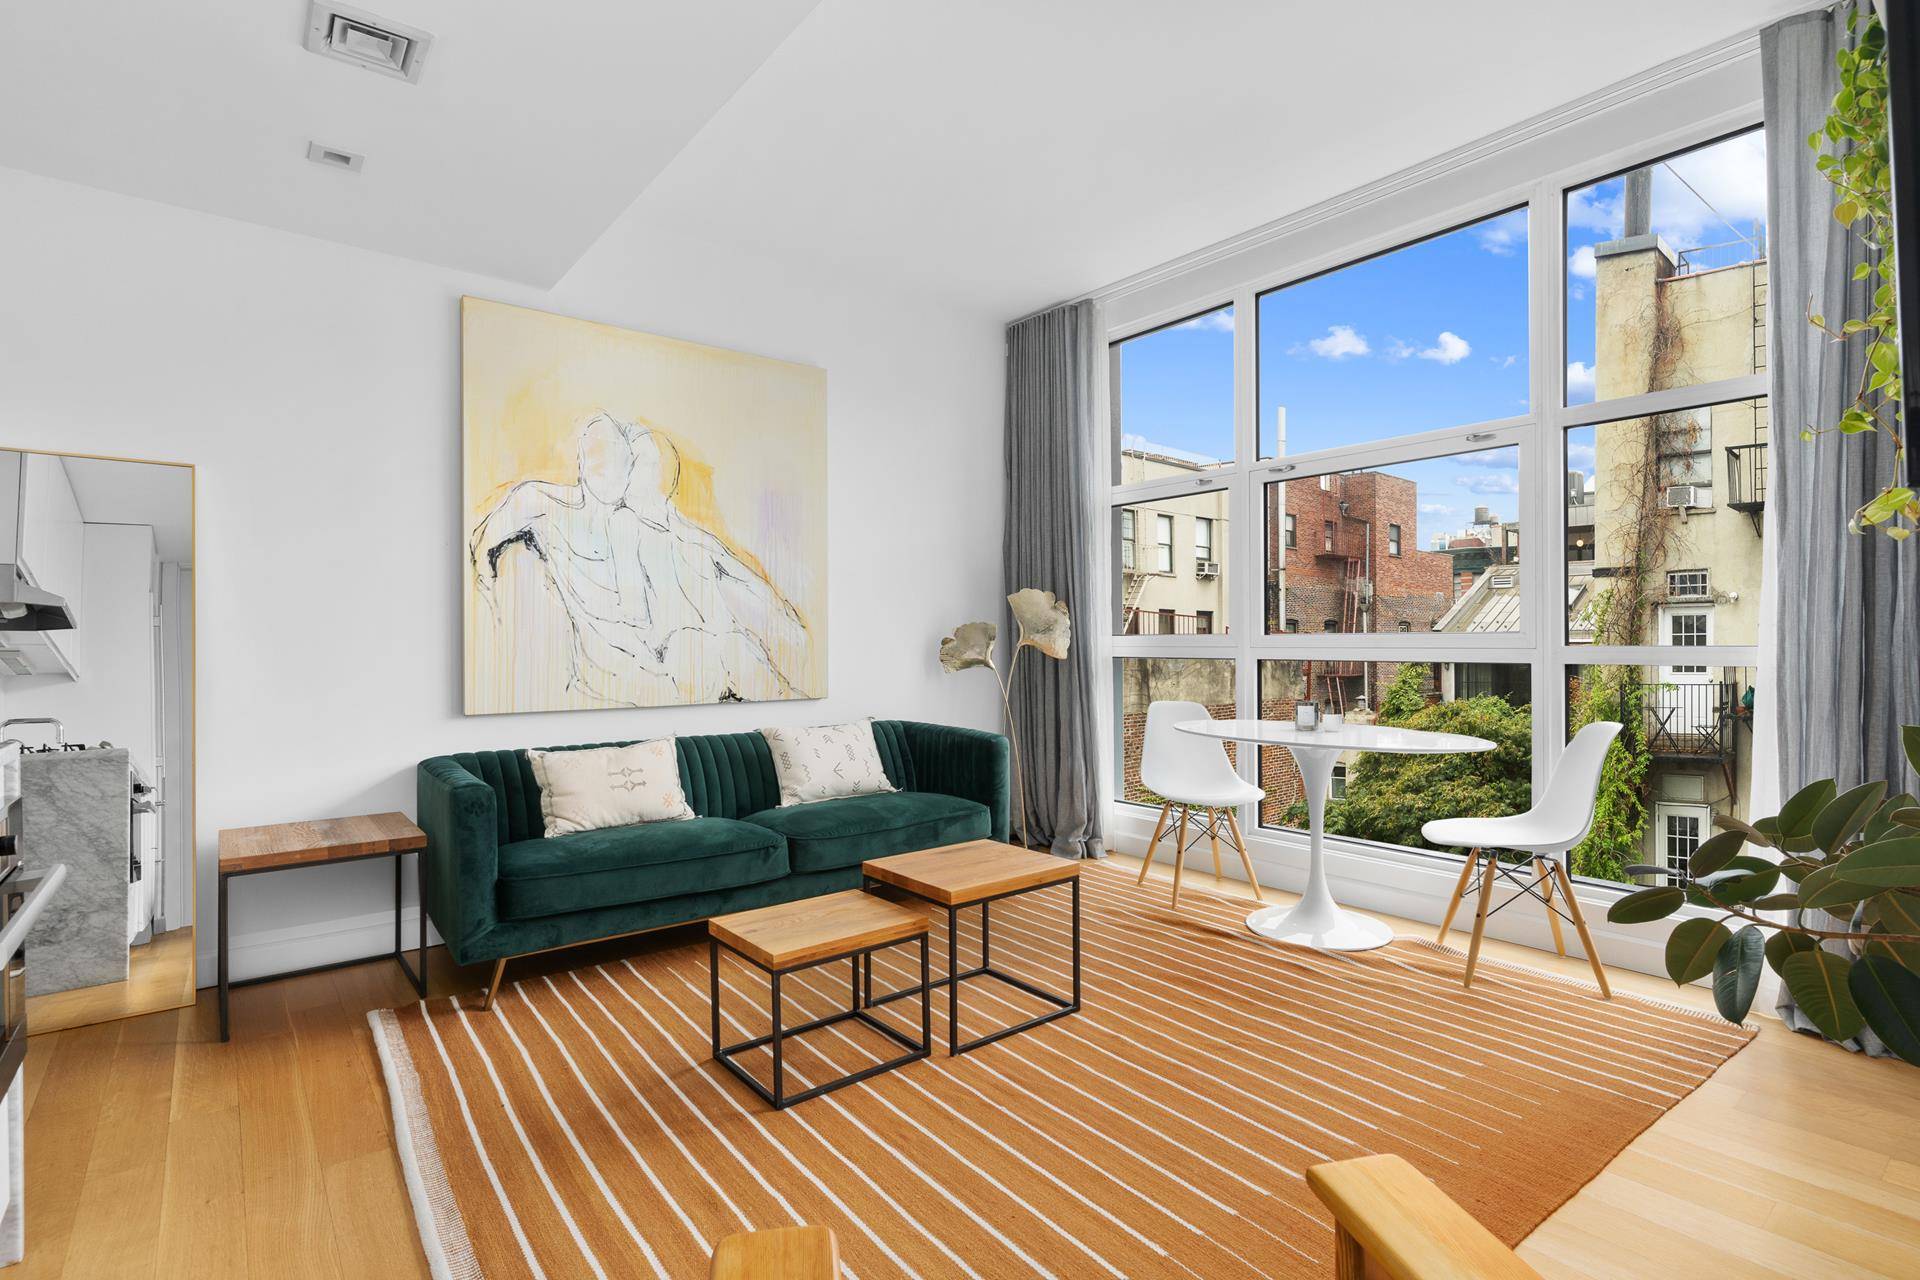 Situated at the intersection of Nolita and NoHo, this impeccably finished and light filled one bedroom home at 250 Bowery will not disappoint.